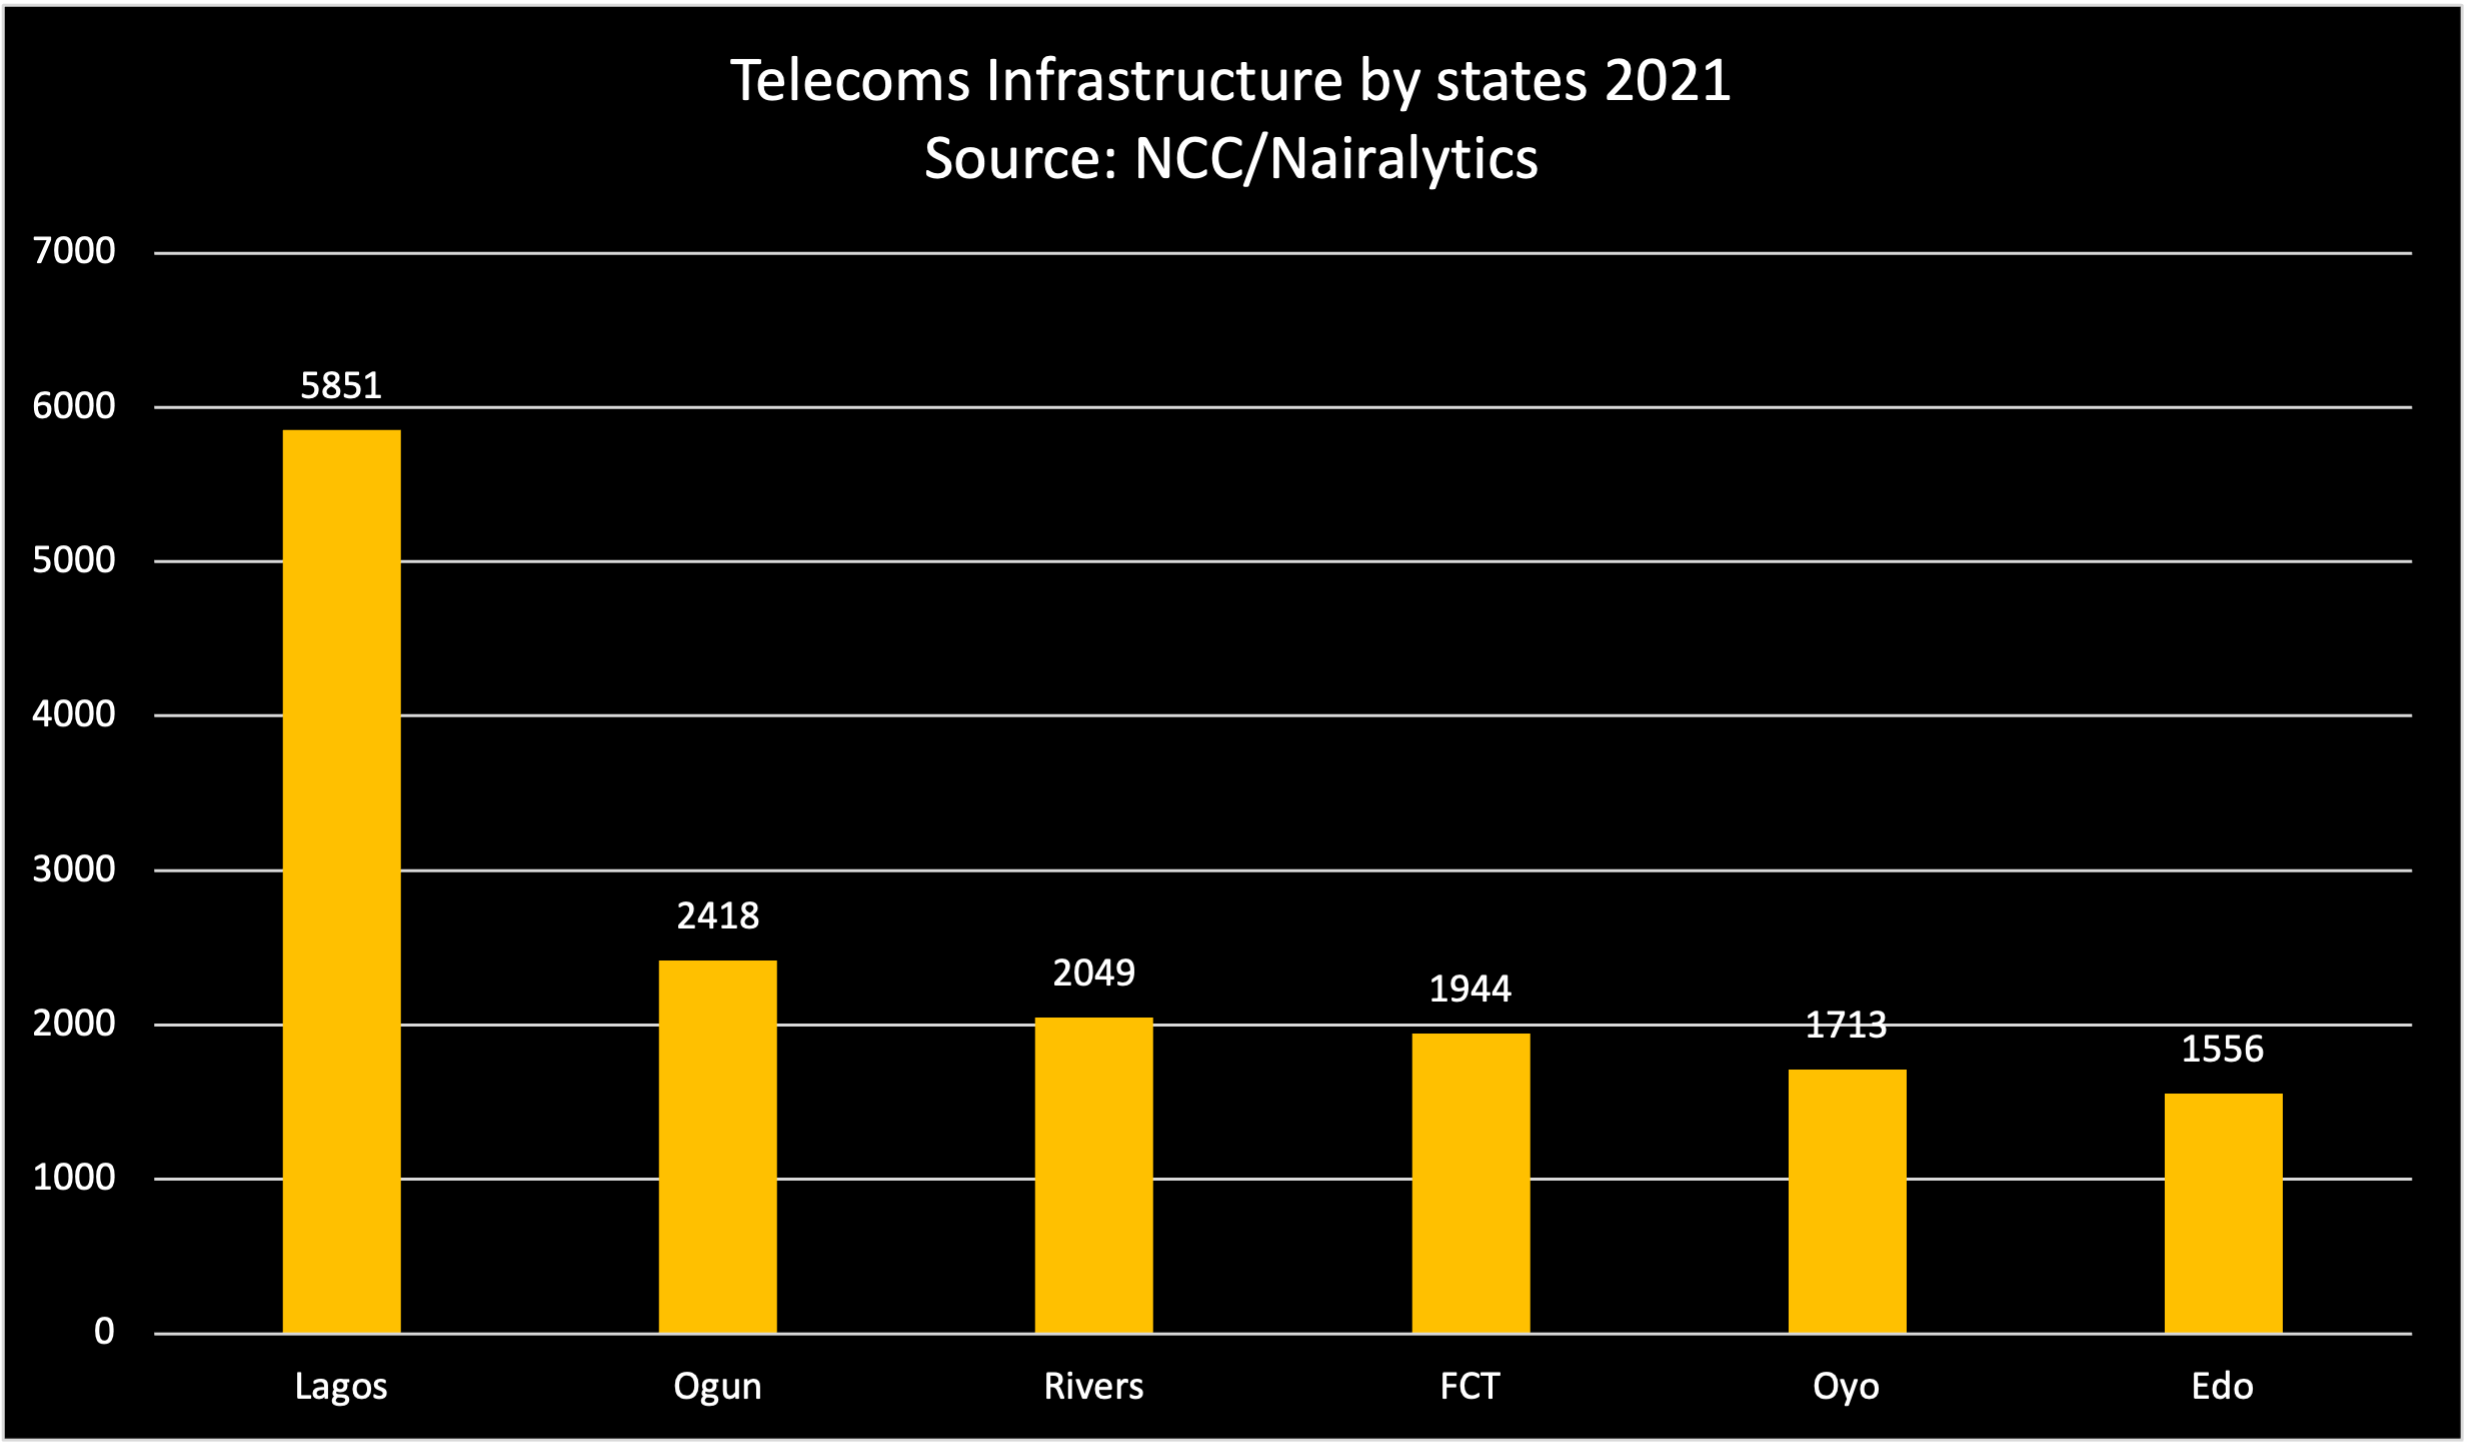 Top States with Telecoms Infrastructure in Nigeria - 2021